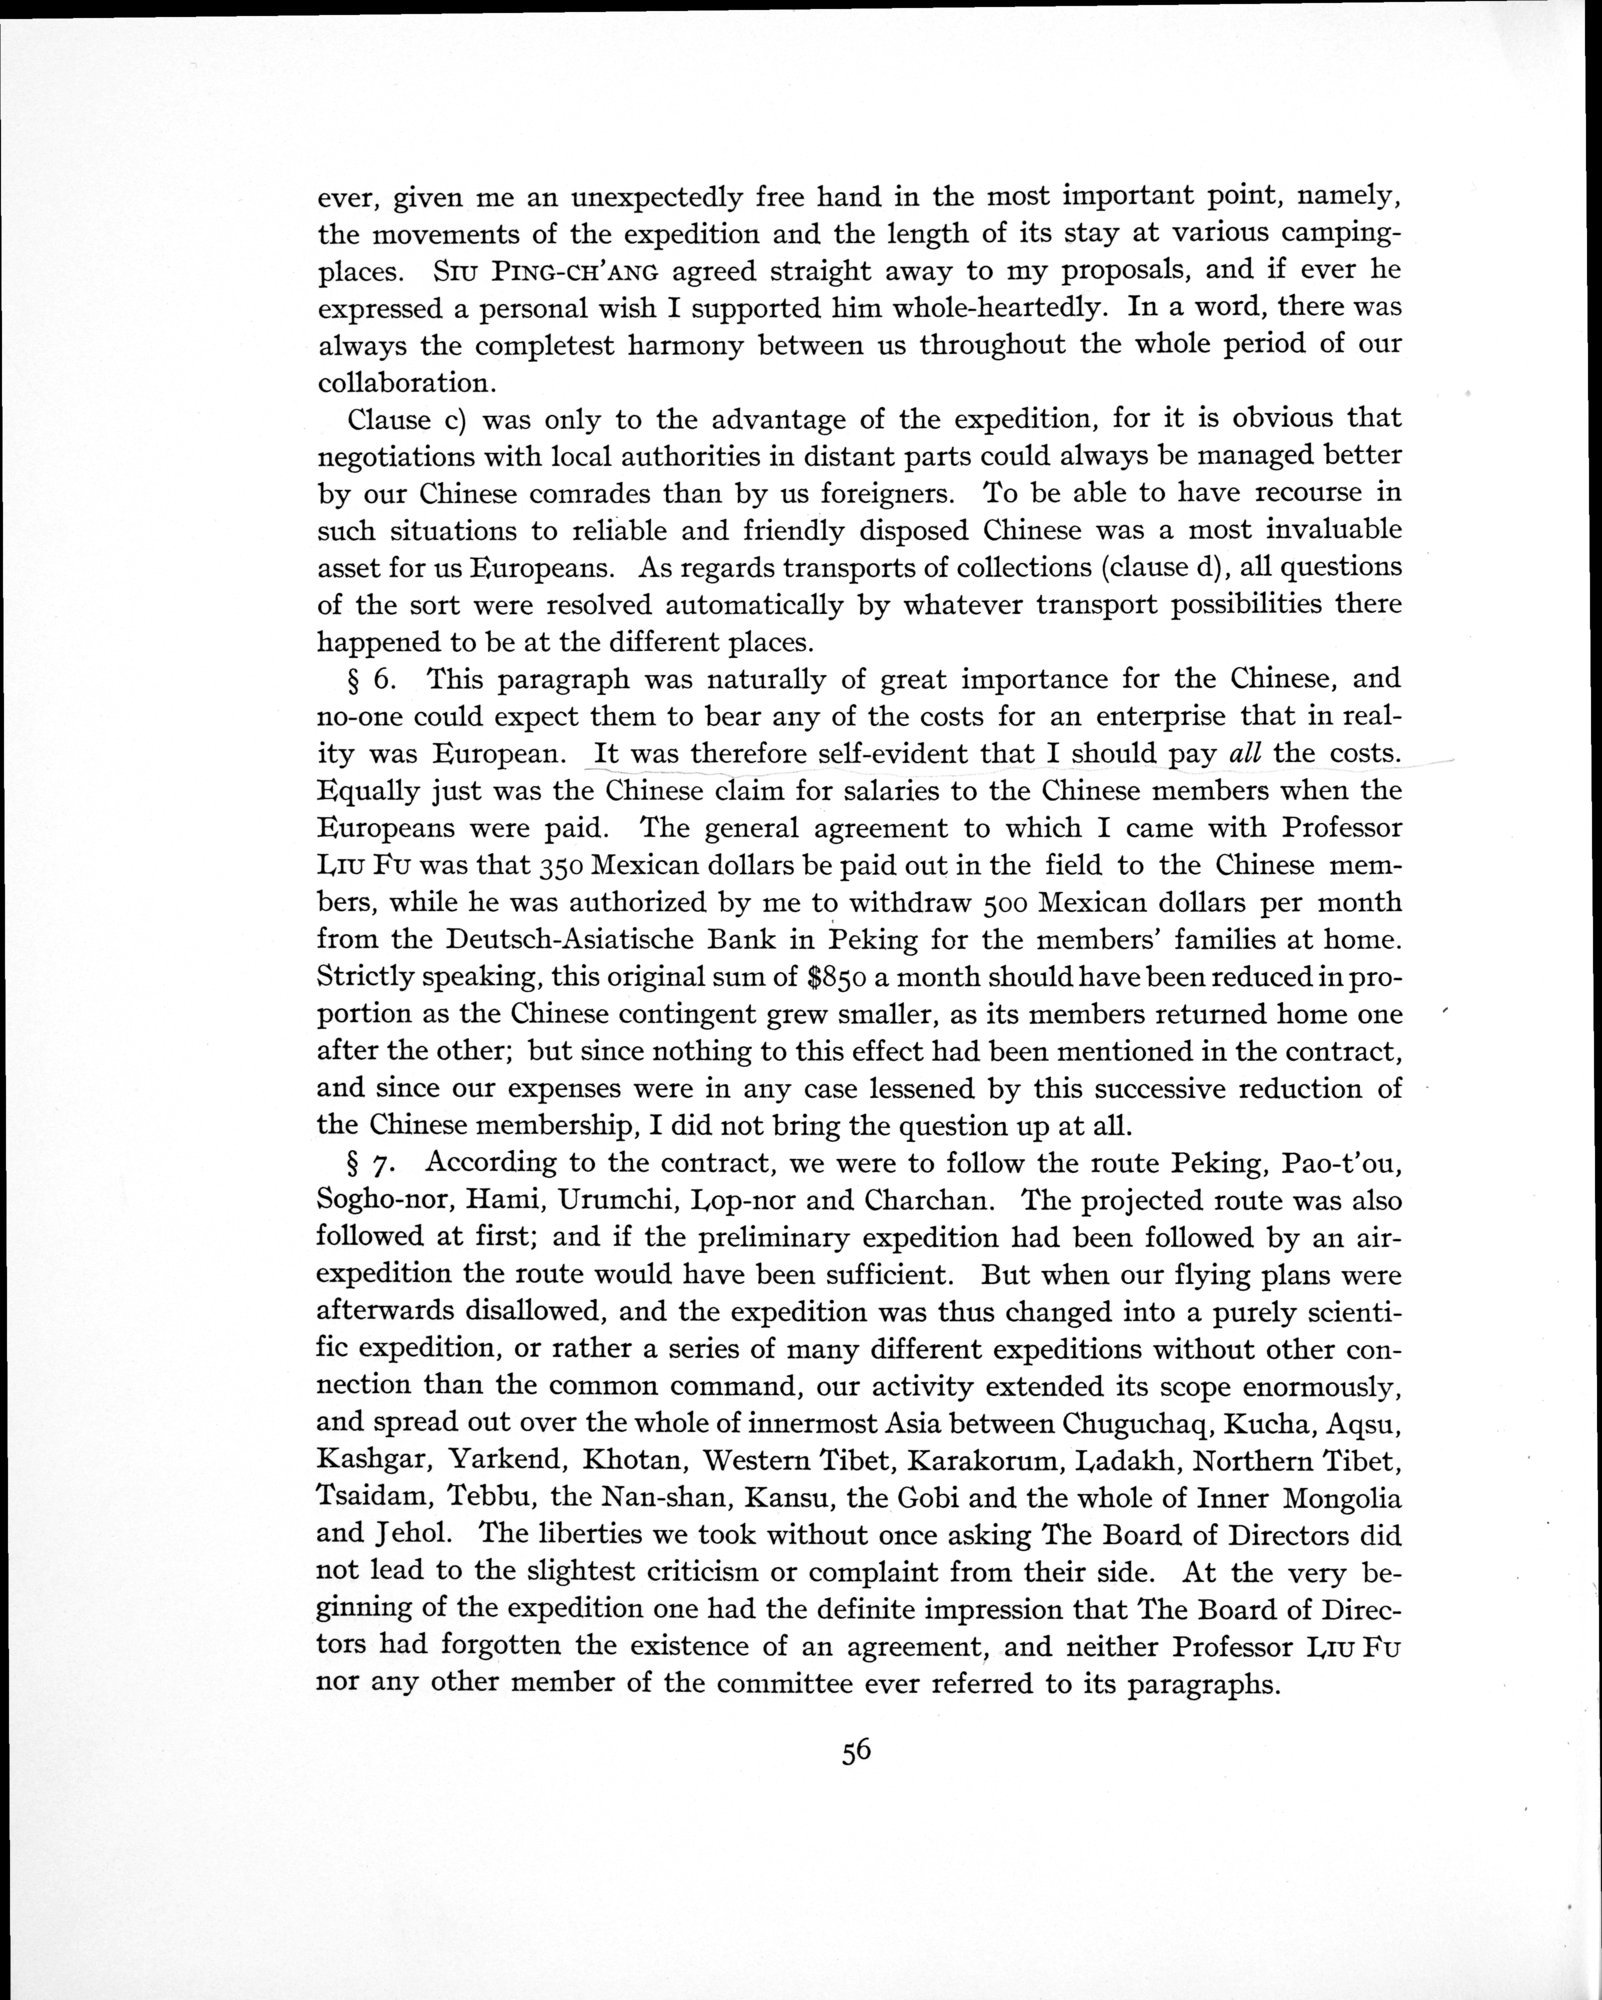 History of the Expedition in Asia, 1927-1935 : vol.1 / Page 100 (Grayscale High Resolution Image)